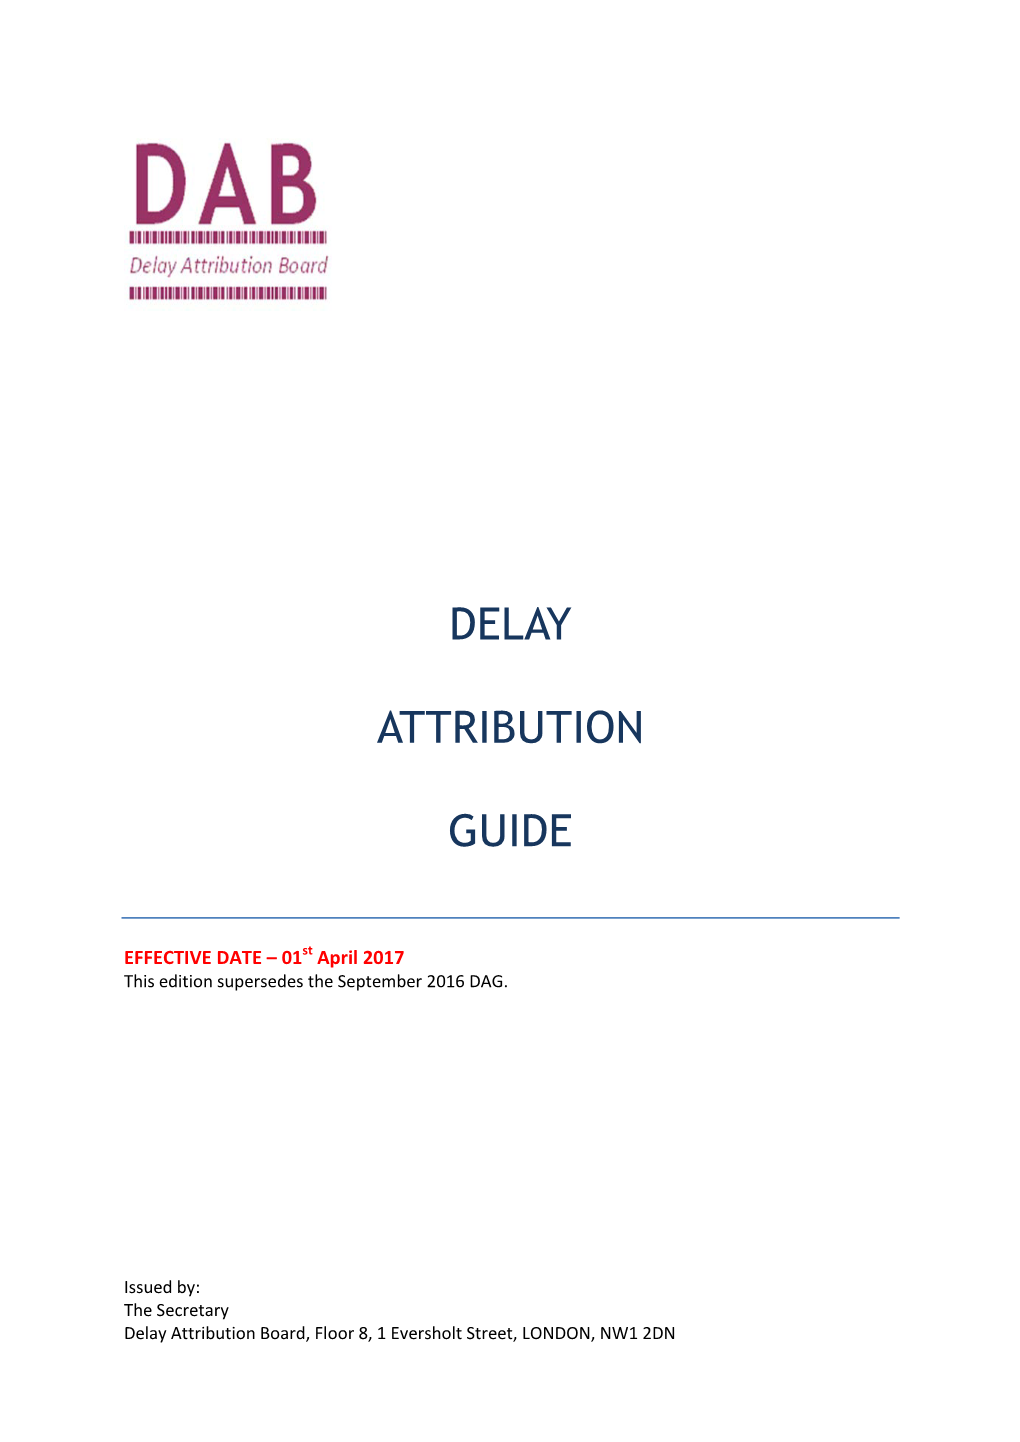 Delay Attribution Guide - April 2017 Page 2 of 127